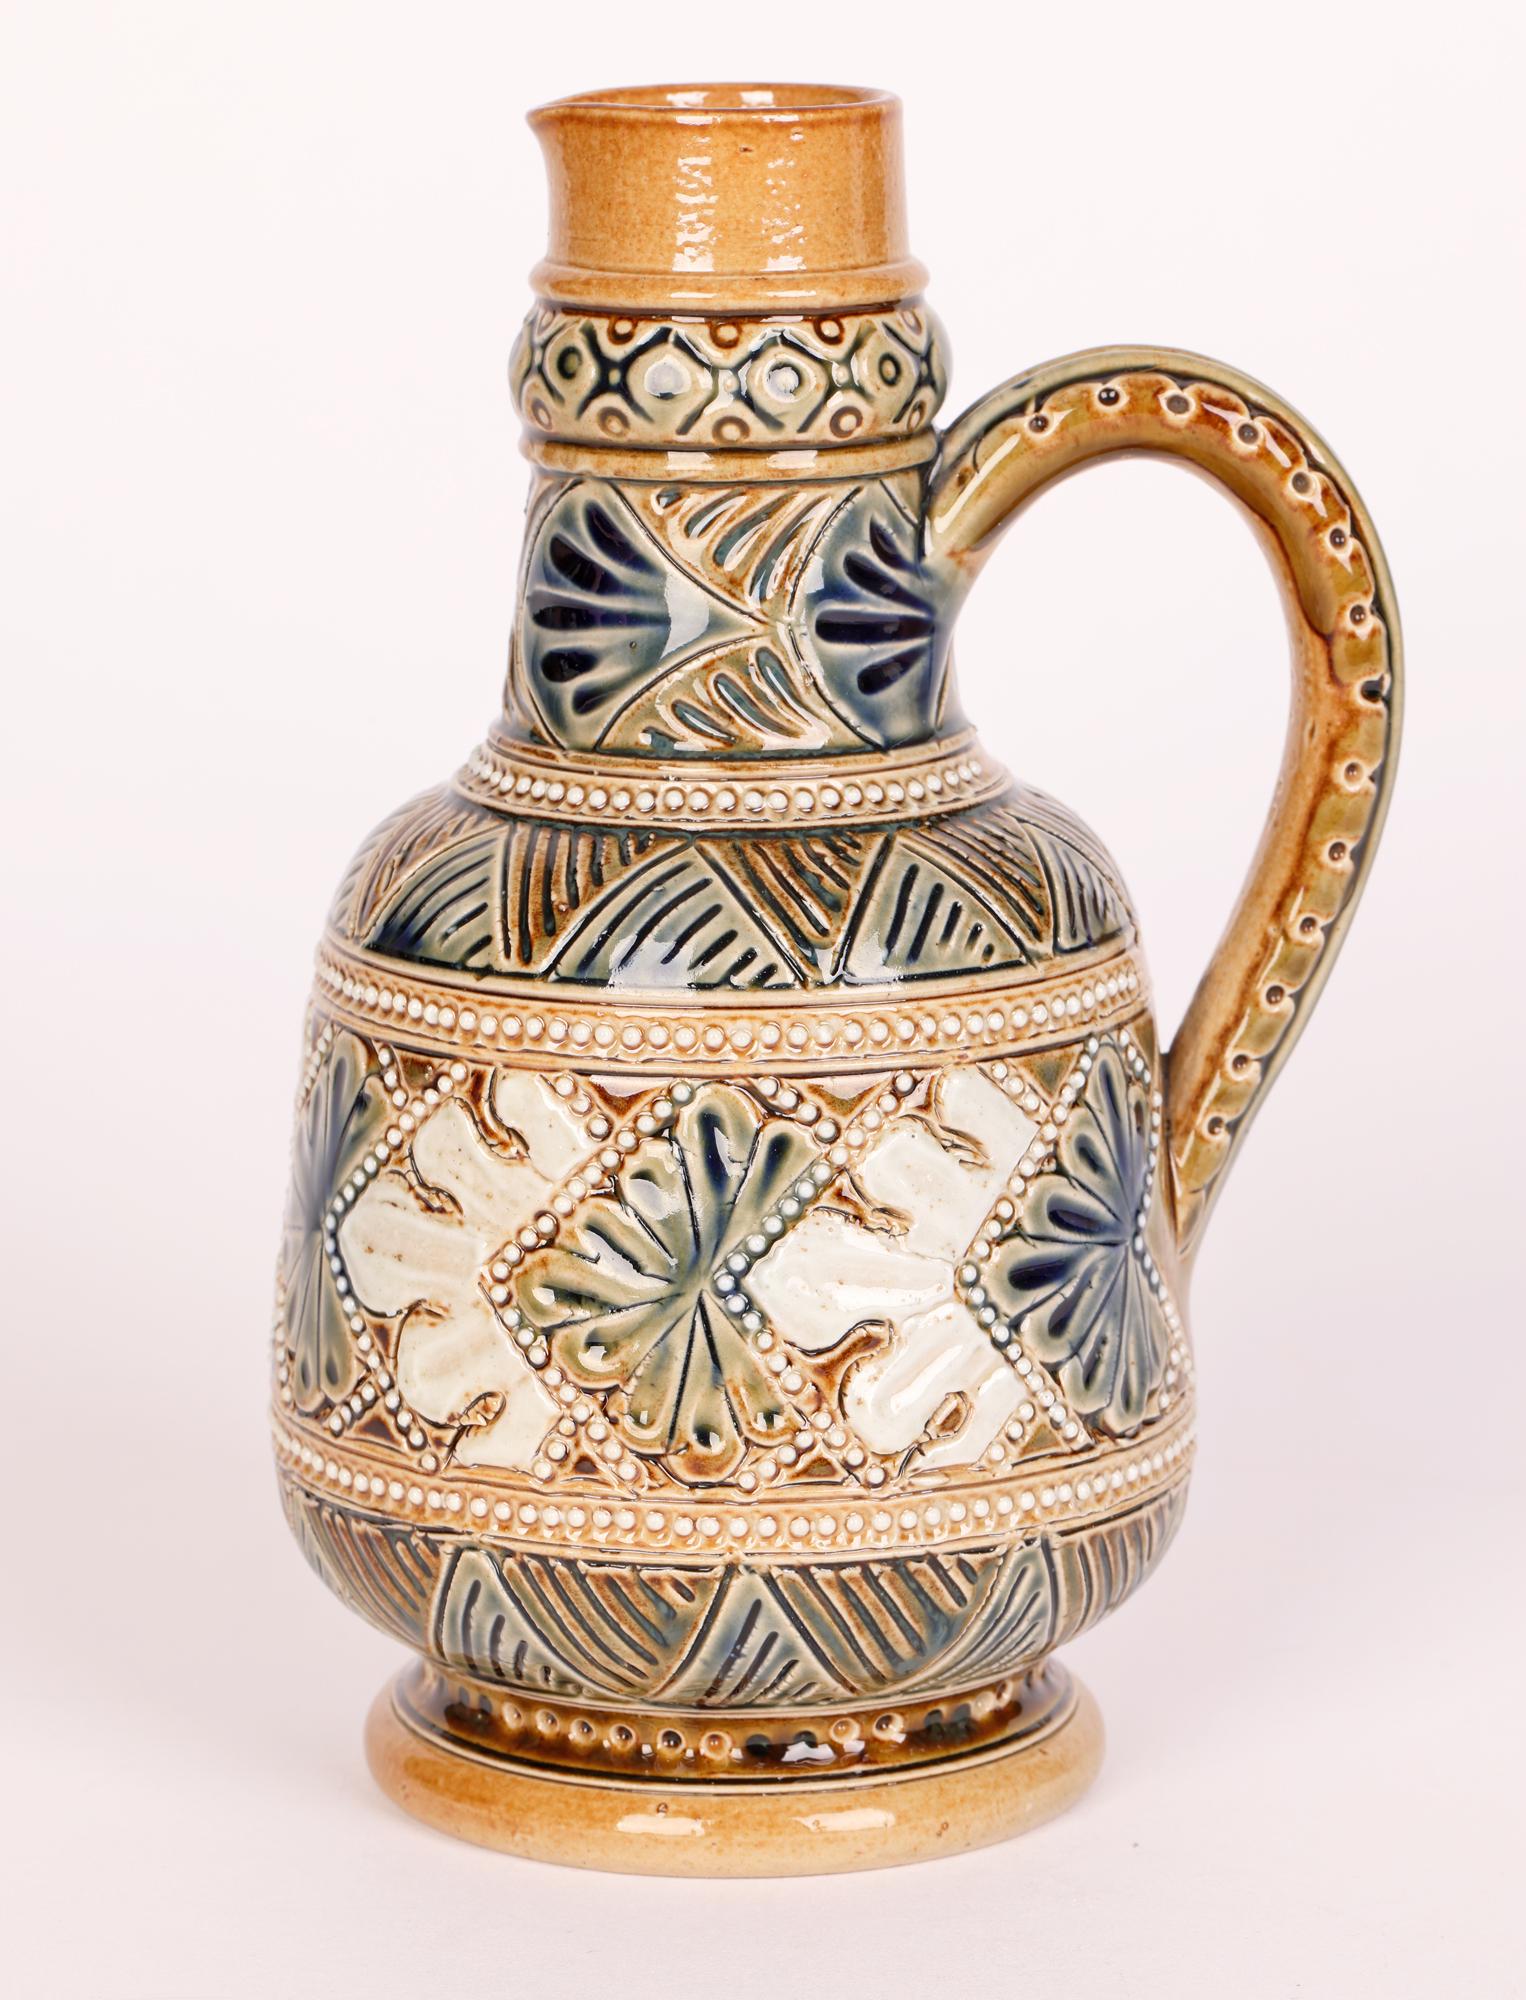 Doulton Lambeth Stoneware Ewer with Stylized Leaf Motifs by Edith Lupton For Sale 2